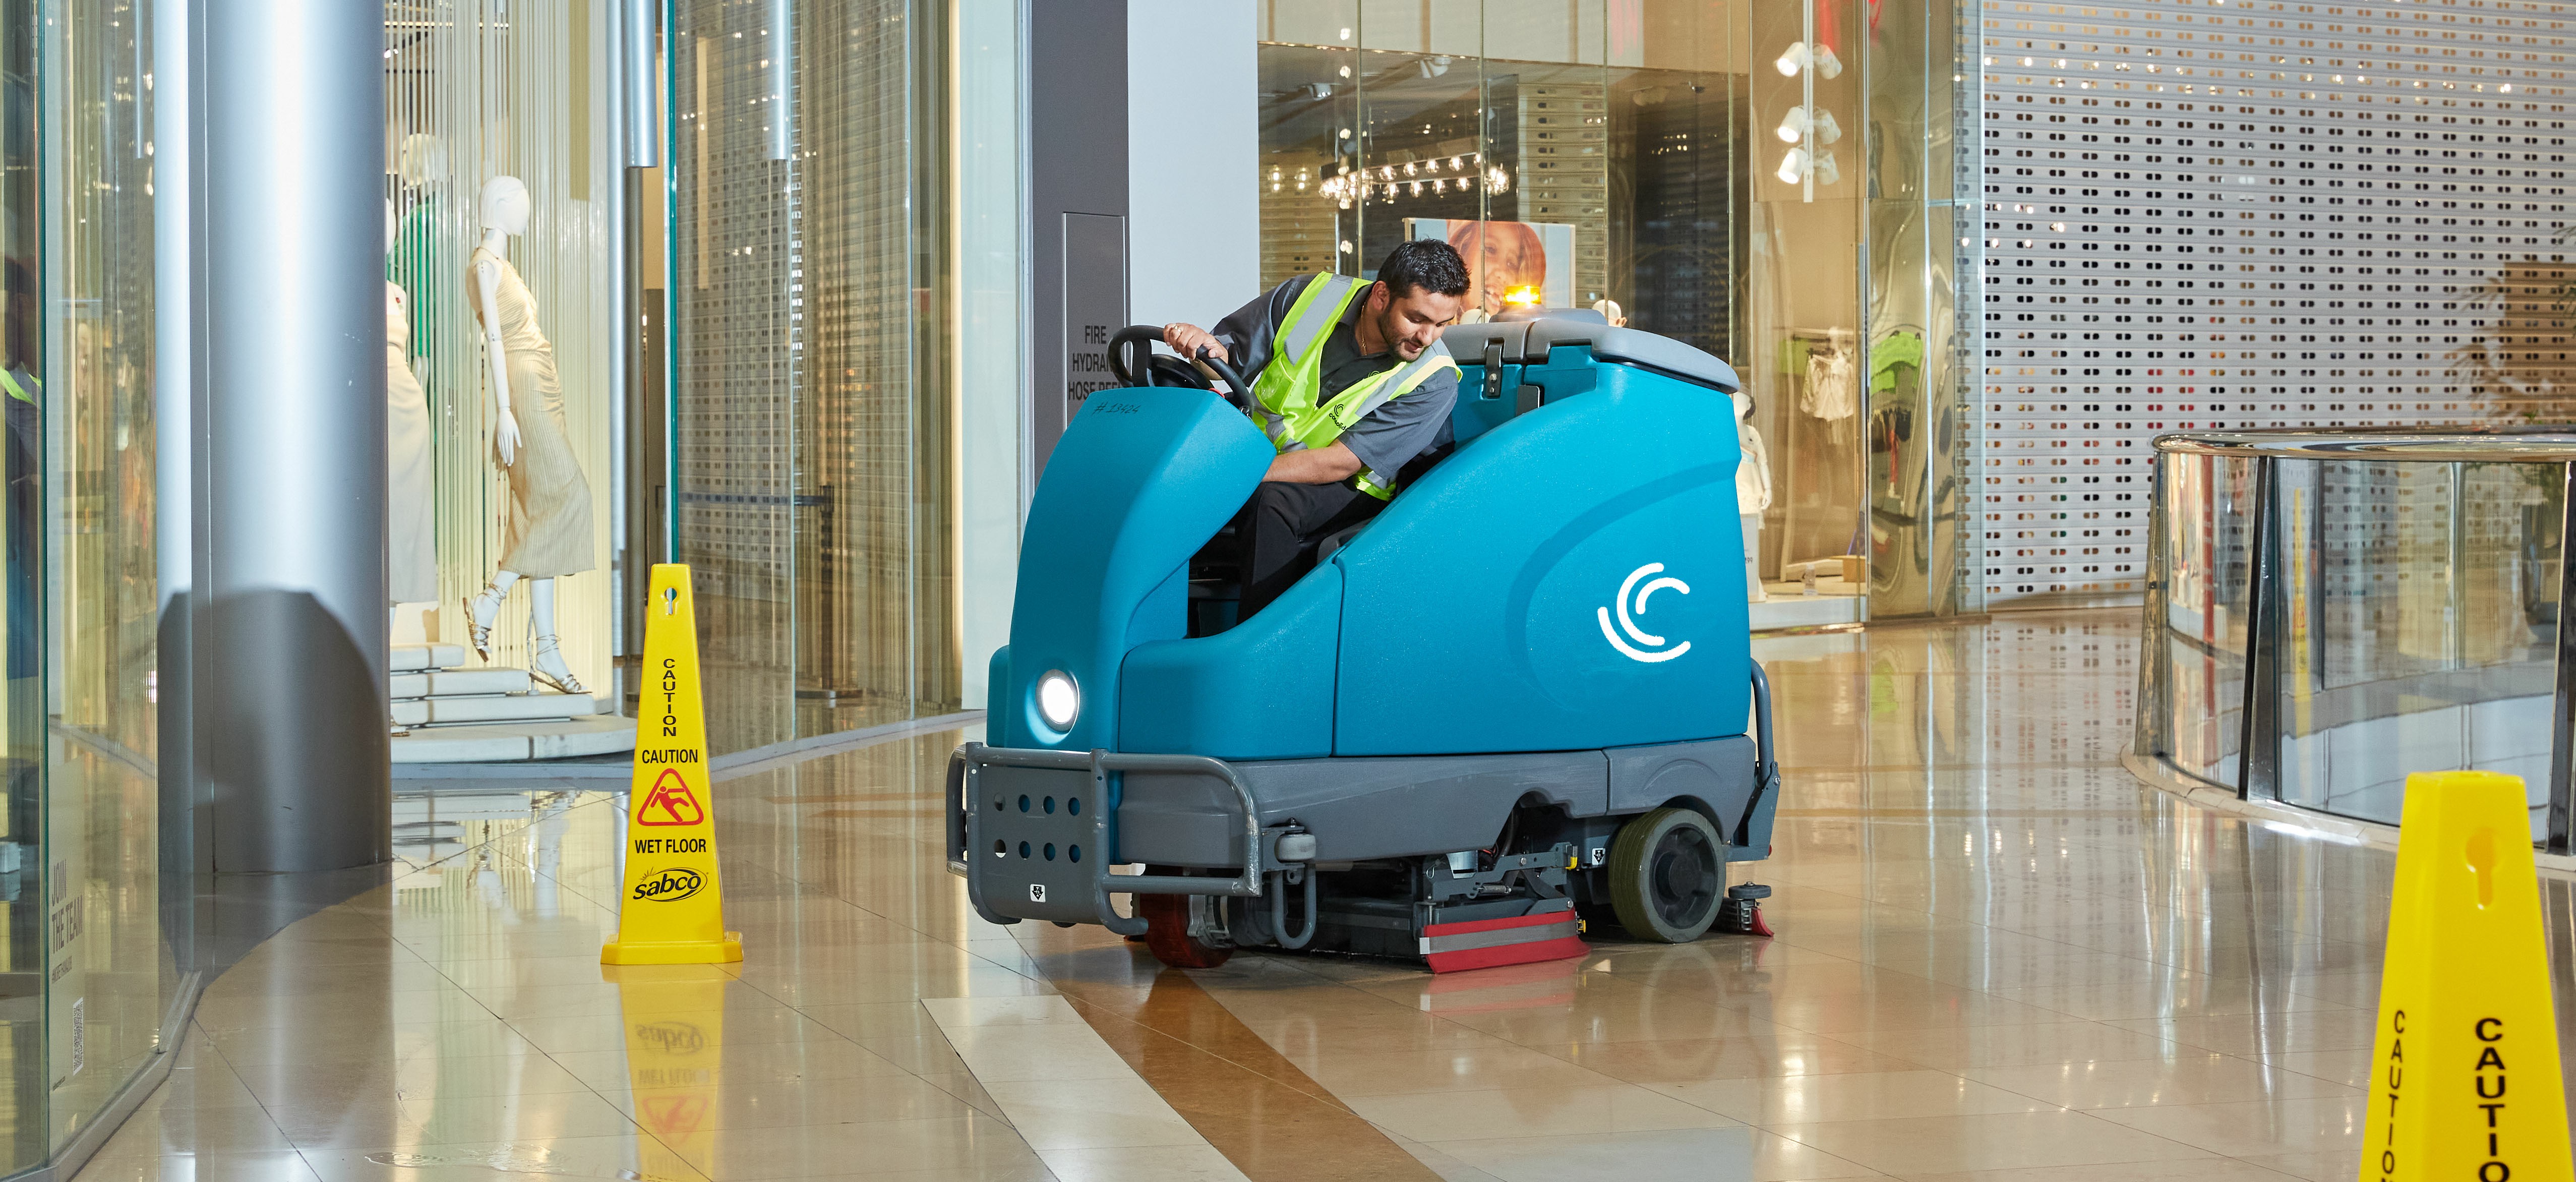 Retail shopping centre cleaning